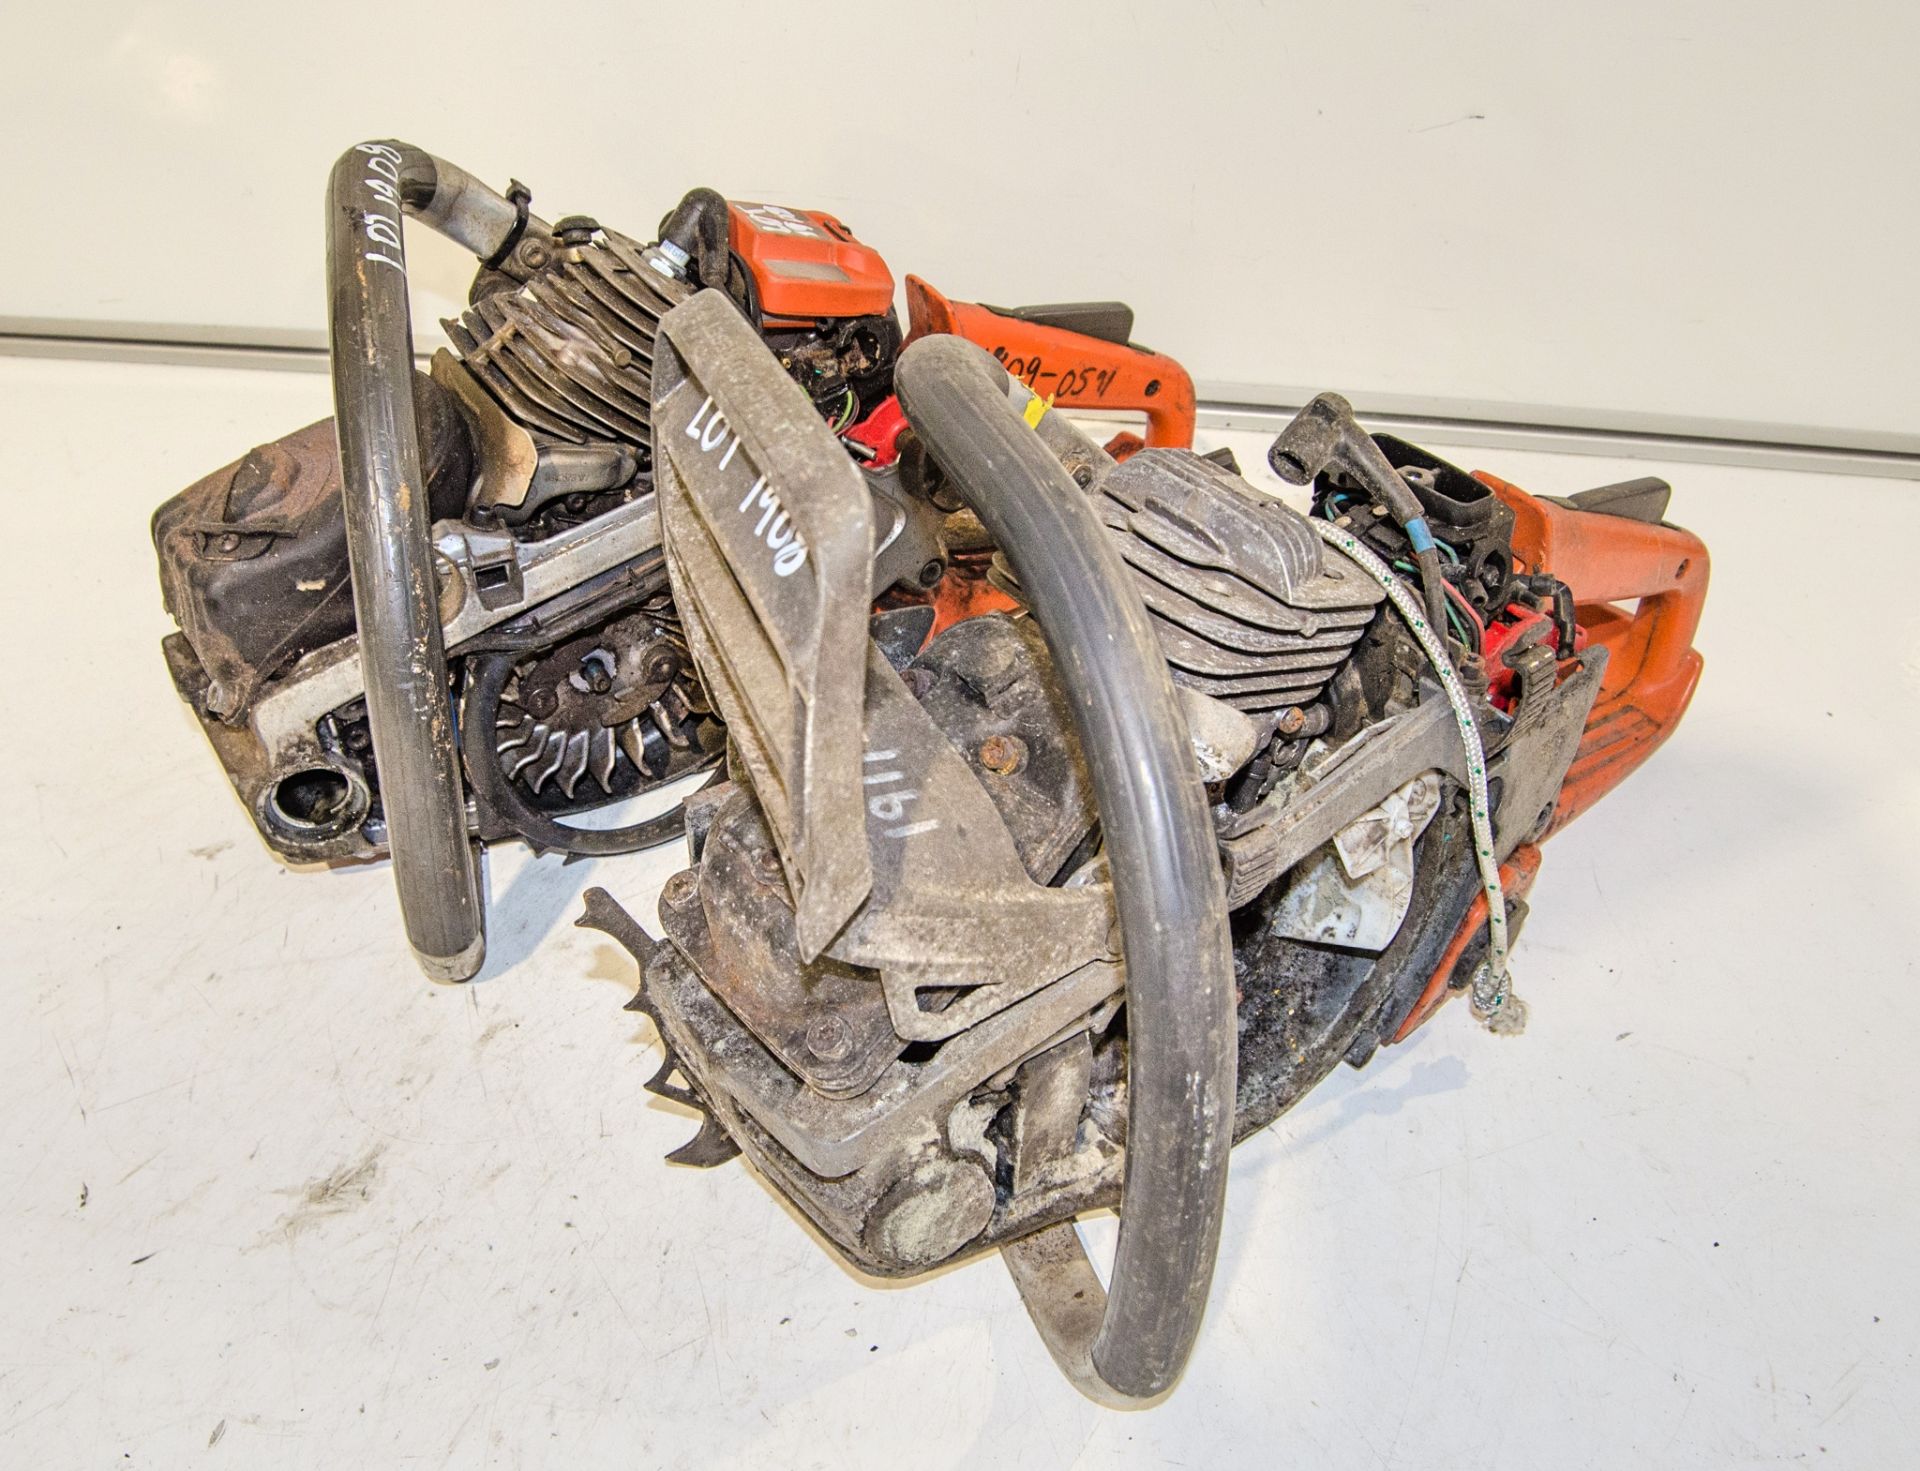 2 - Husqvarna petrol driven chain saws for spares